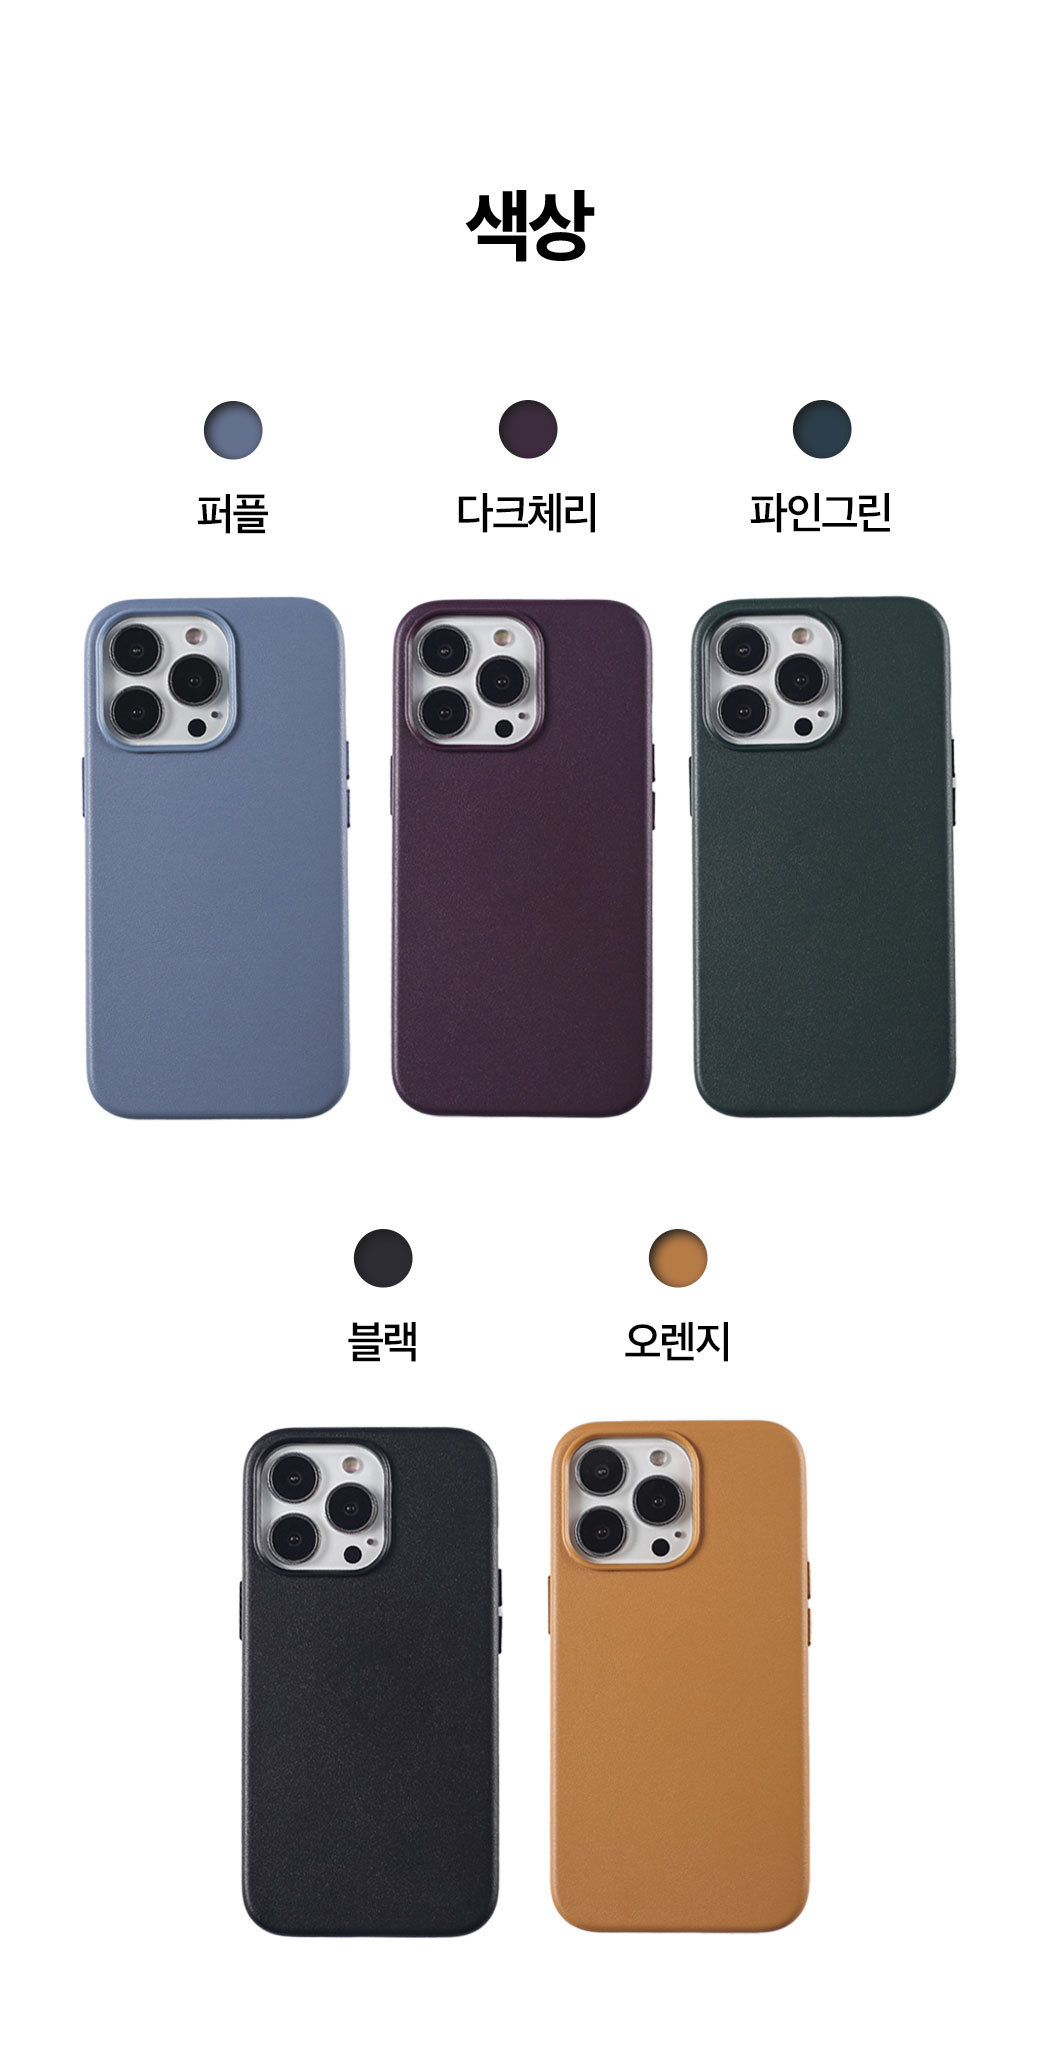 iPhone 13 color